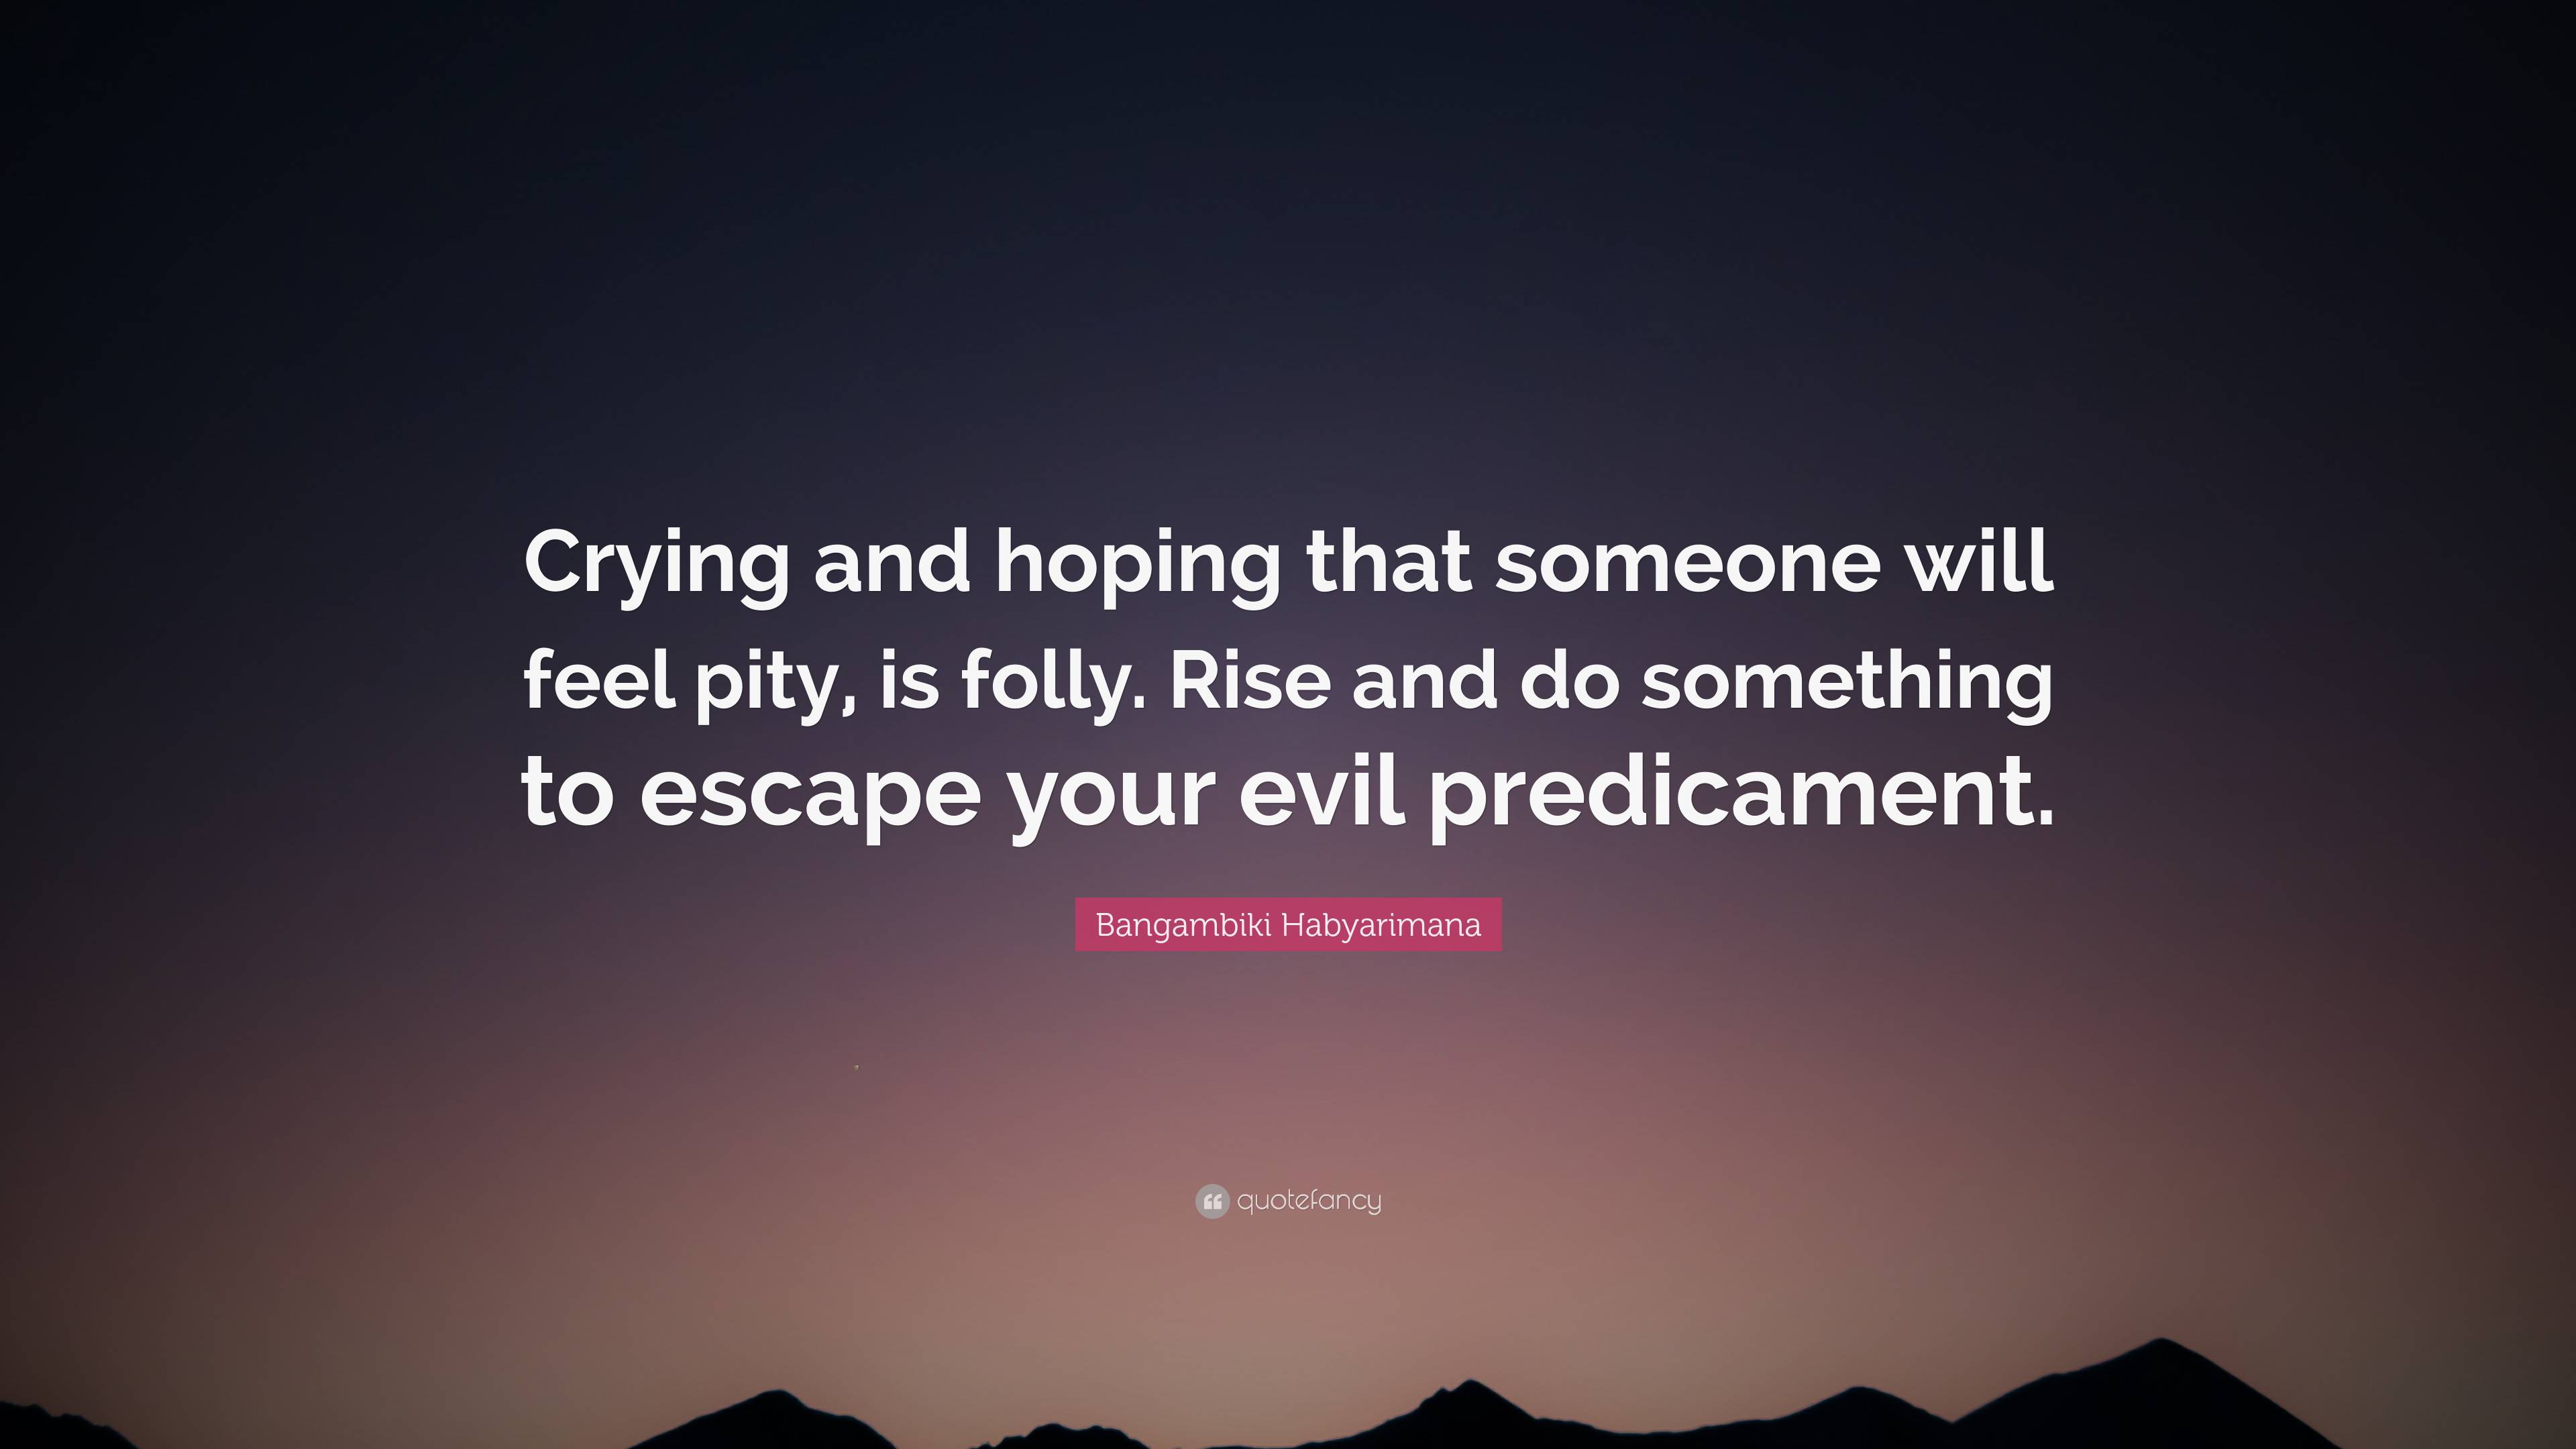 Bangambiki Habyarimana Quote: “Crying and hoping that someone will feel ...